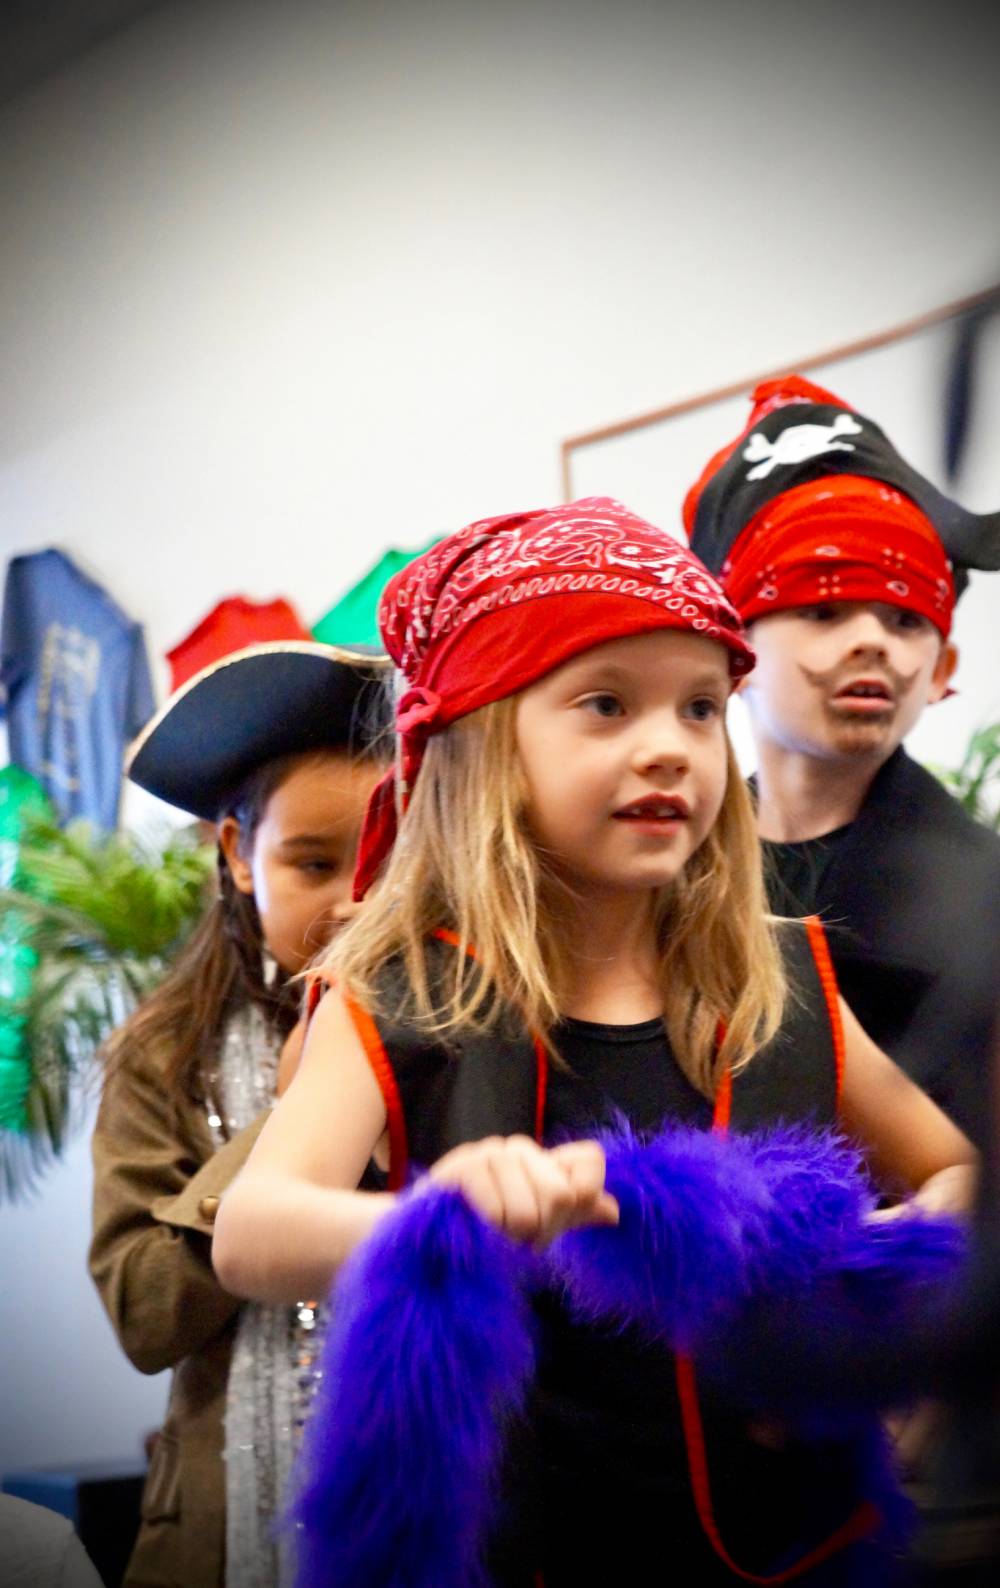 TOP ARIZONA THEATER CAMP: Imagination Theatre Camp is a Top Theater Summer Camp located in Mesa Arizona offering many fun and enriching Theater and other camp programs. 